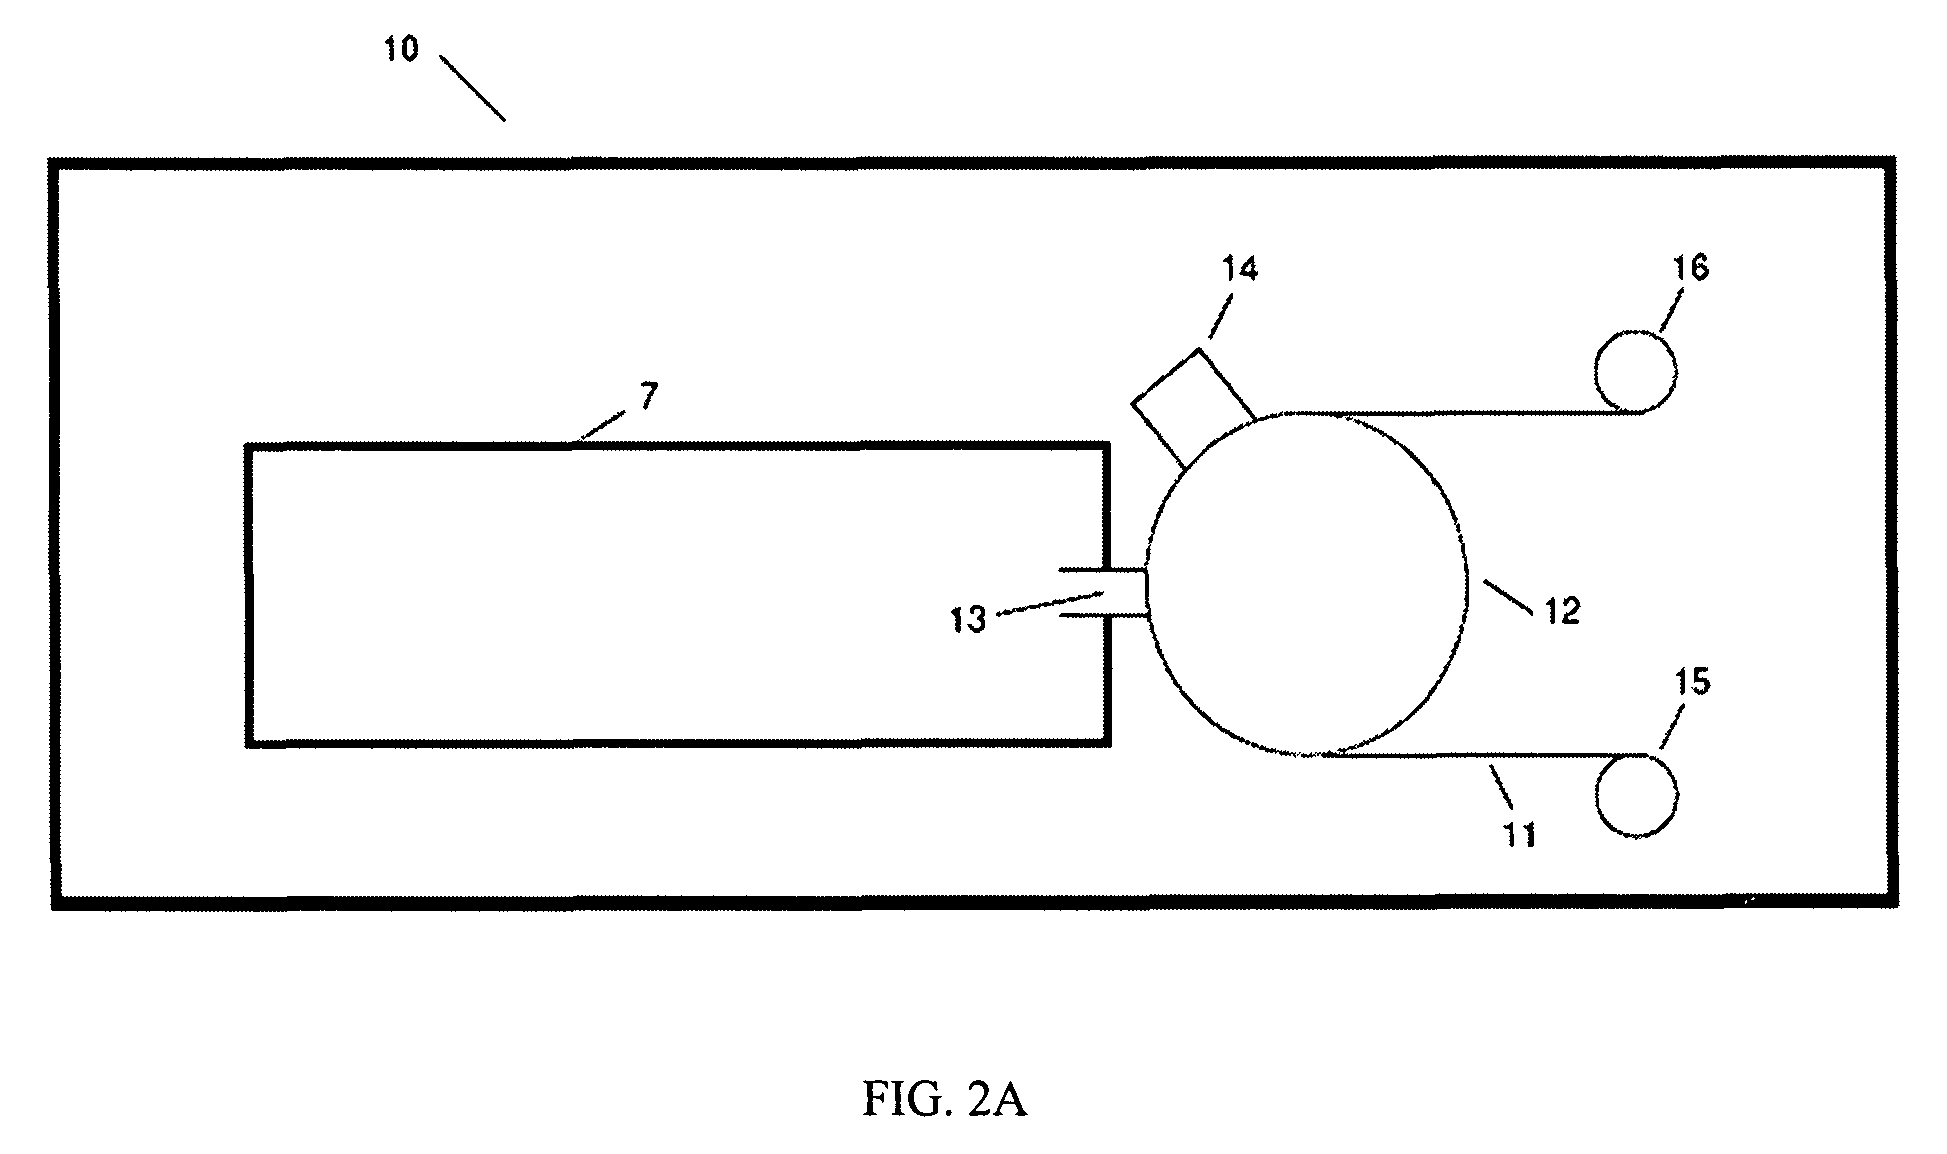 Methods for co-flash evaporation of polymerizable monomers and non-polymerizable carrier solvent/salt mixtures/solutions